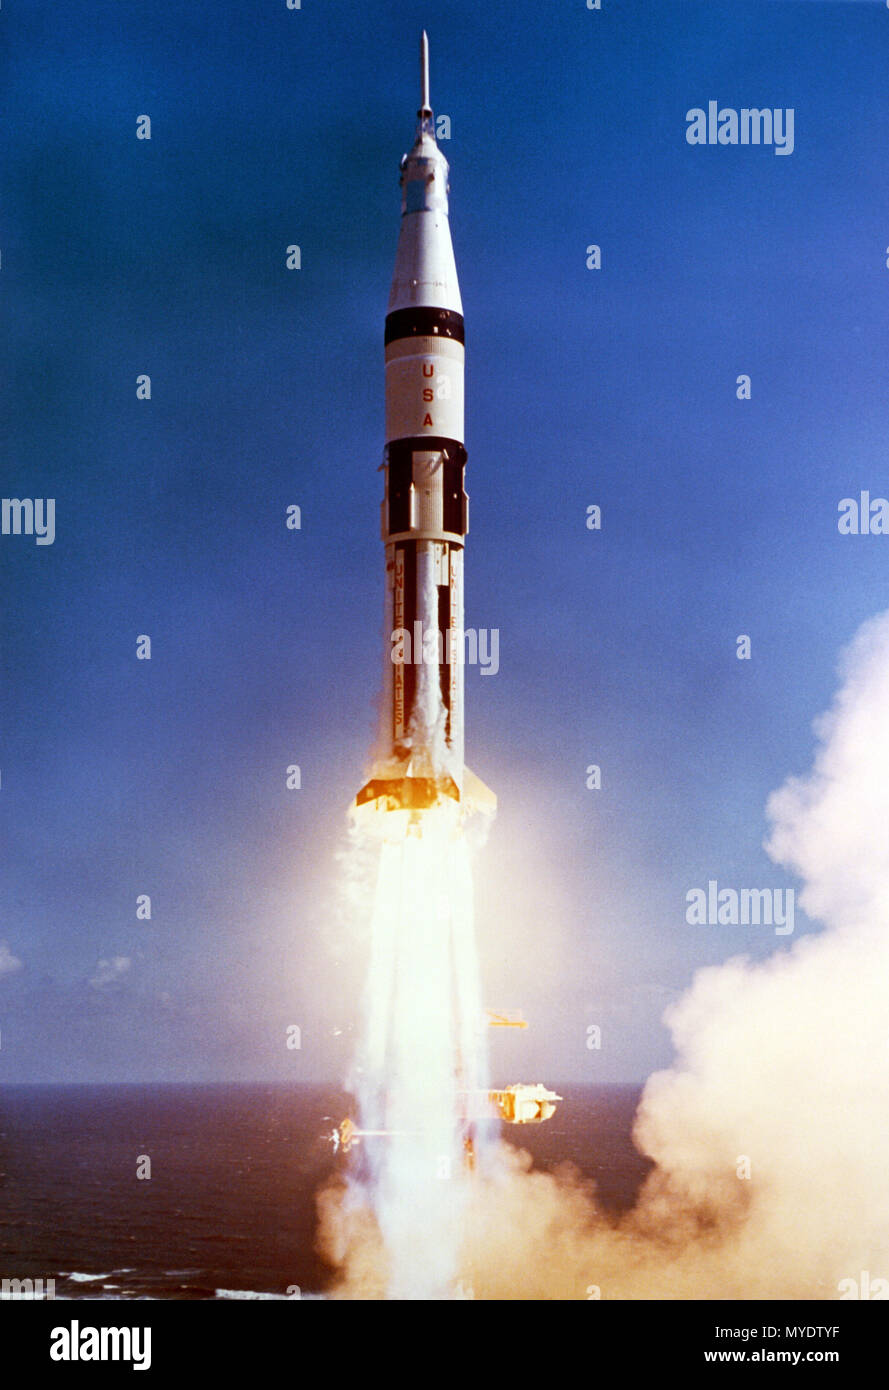 A Saturn 18 space launch vehicle lifts off from Launch Complex 34 carrying Apollo 7 astronauts Walter M. Schirra Jr., Don F. Eisele and Walter Cunningham. Stock Photo